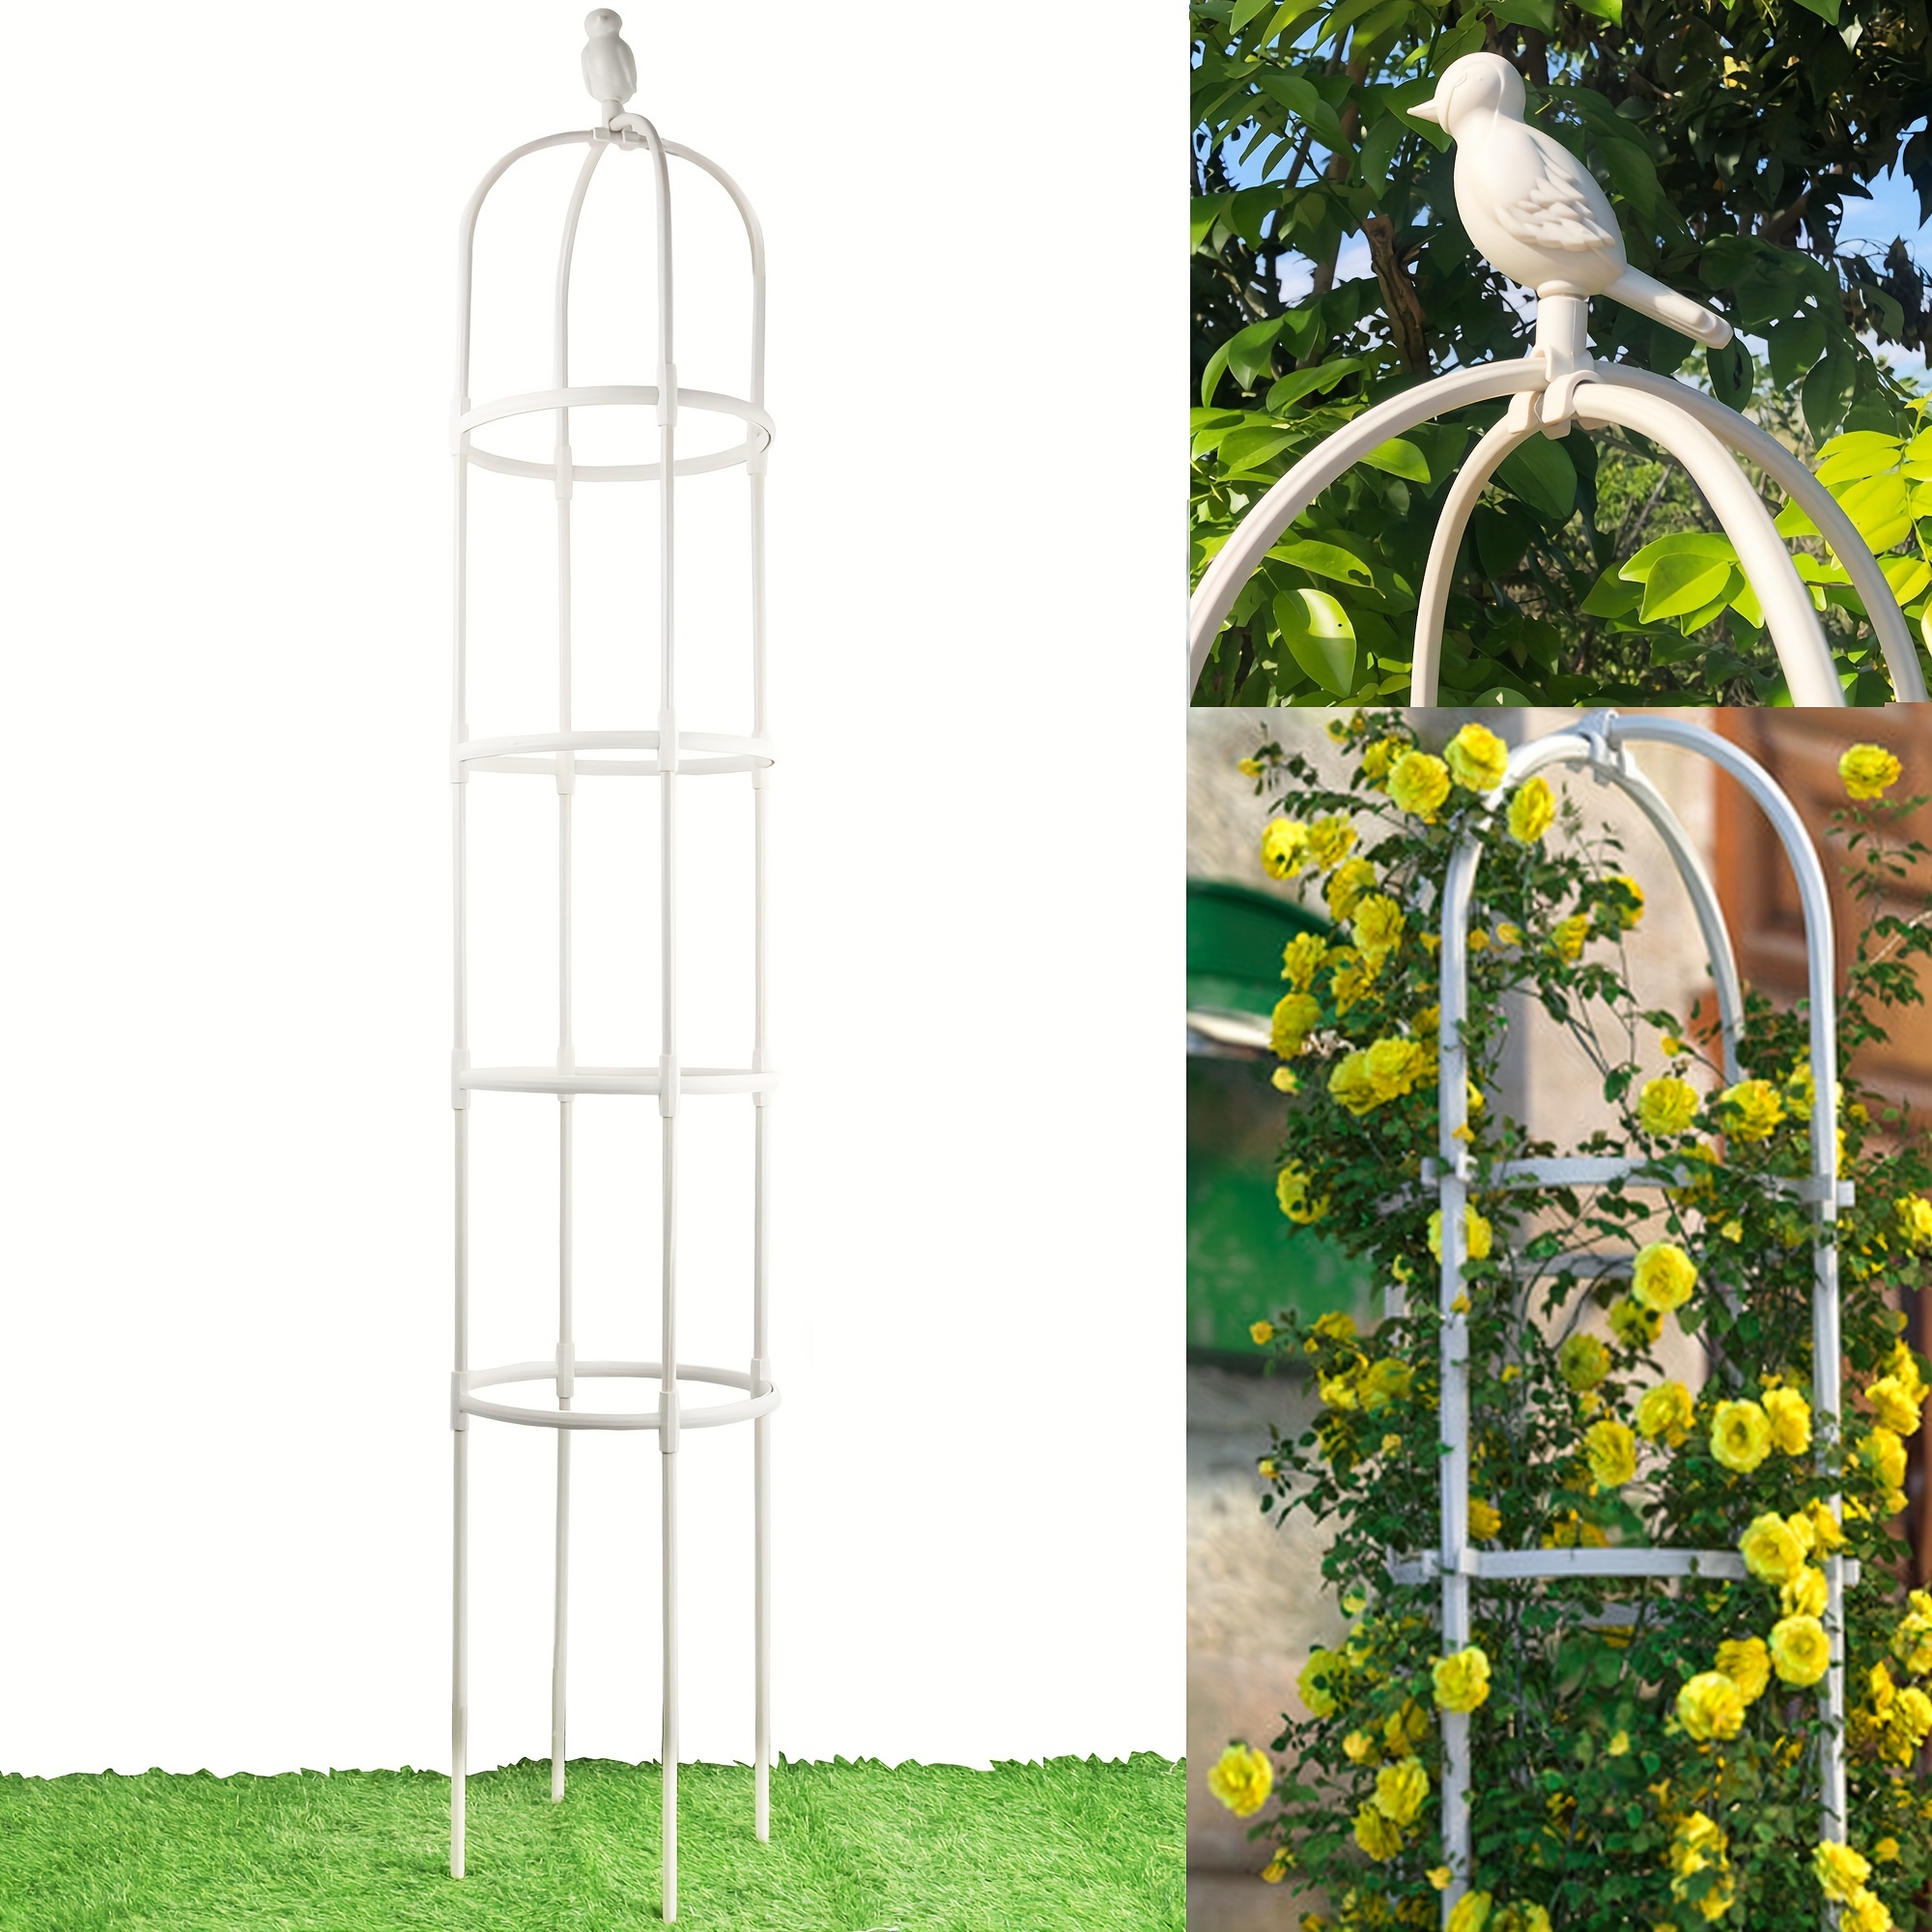 

1pc Plant Climbing Frame With Plastic Coating, Garden Outdoor And Indoor Potted Plant Support, Rust Proof White Metal Bracket For Climbing Plants